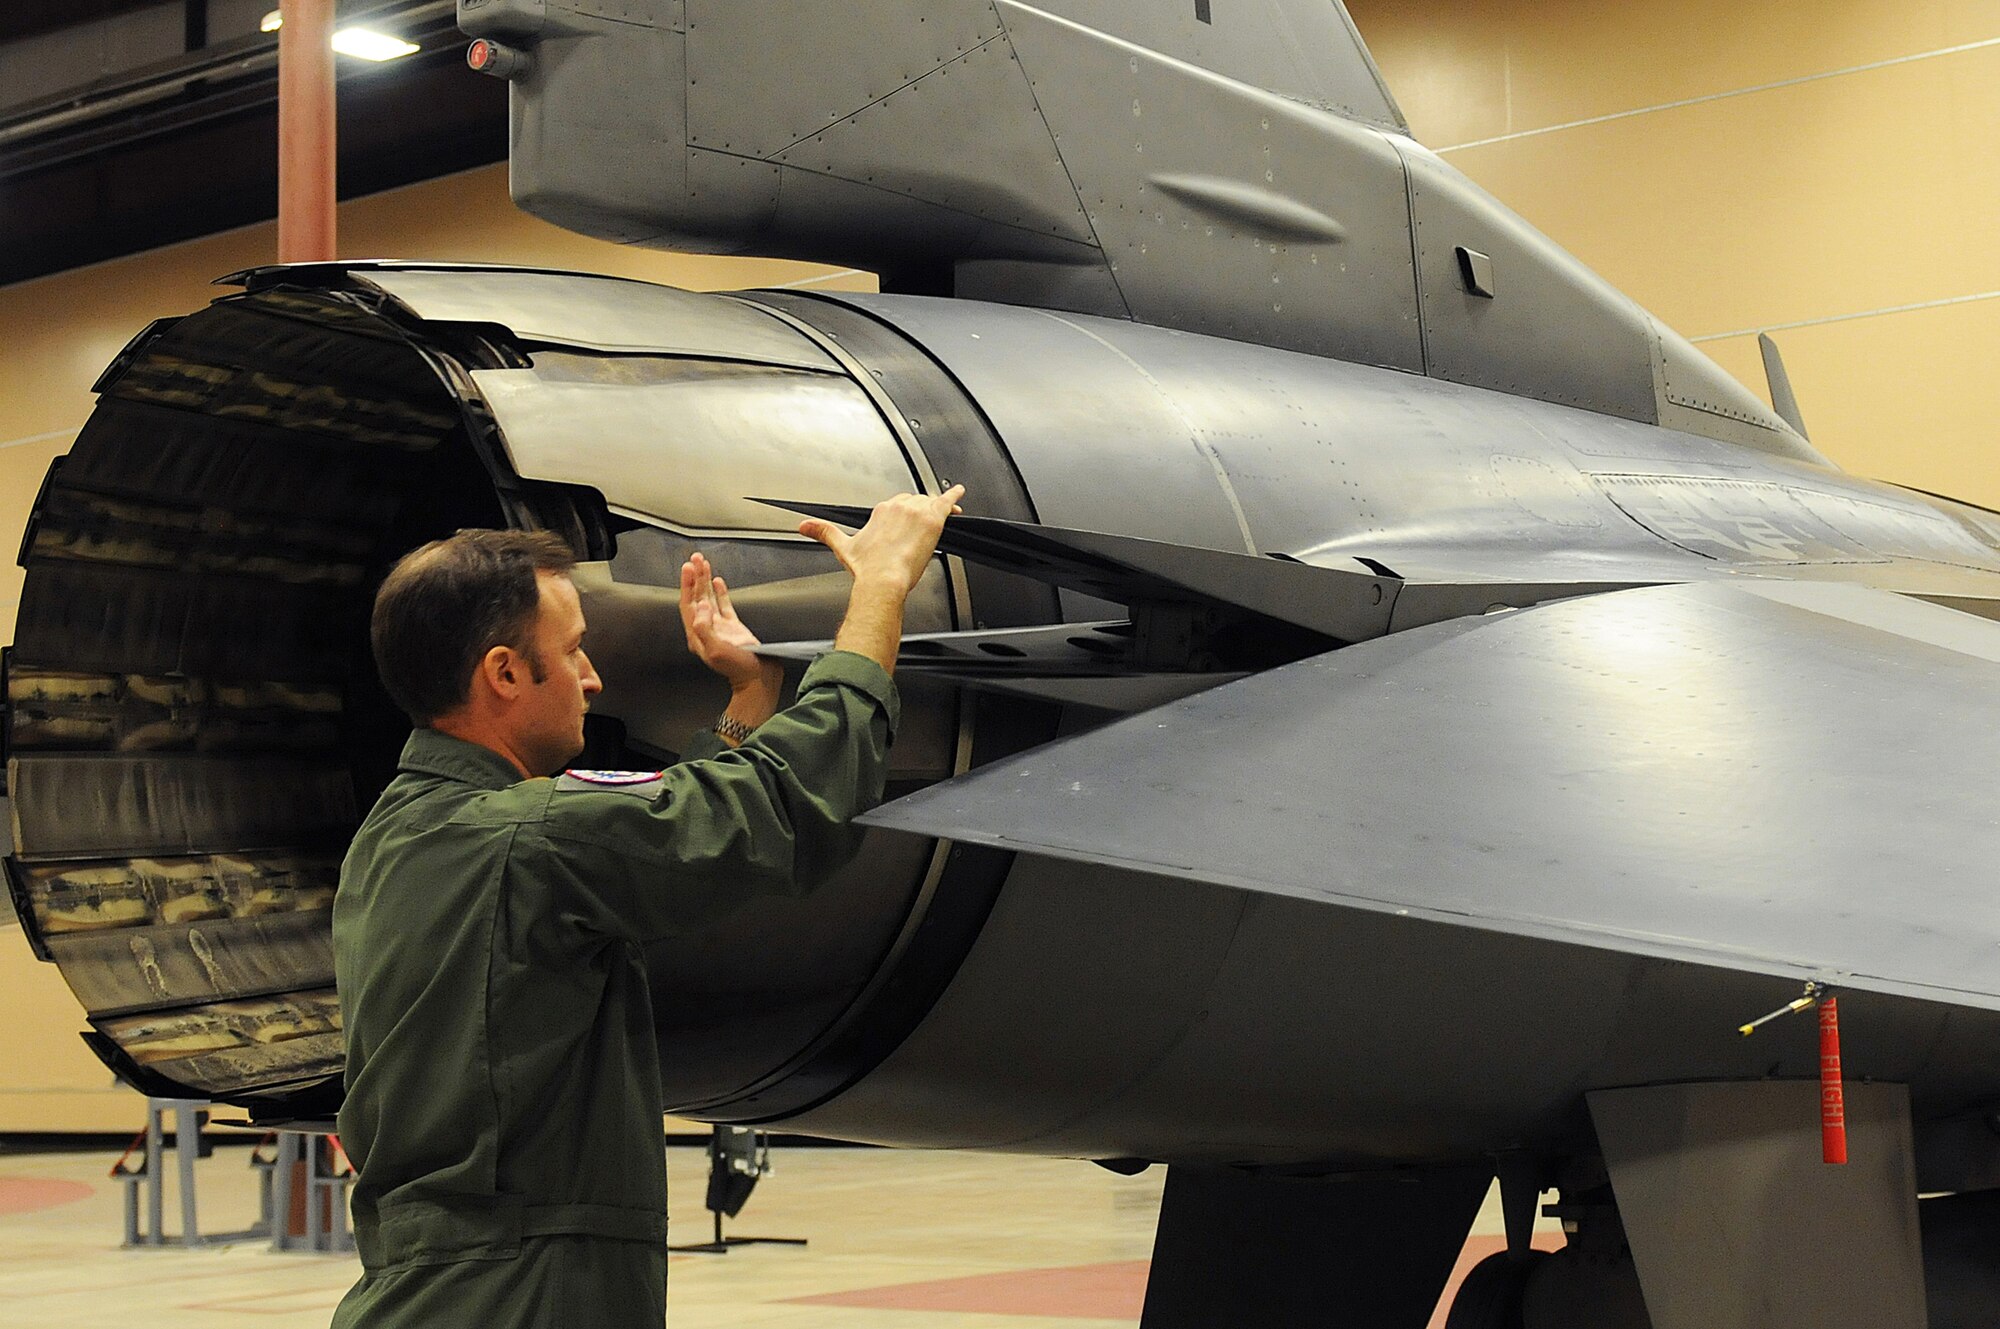 Pilot Maj. Wyck Furcron, with the 121st Fighter Squadron, preforms an operational check of the F-16 Fighter Falcon braking system on March 14. The 113th Wing’s Aerospace Control Alert Detachment reached a milestone of responding to 5,000 alert events on March 21, 2015. The alert unit was created in response to the 9/11 terrorist attacks on the United States on Sept. 11, 2001. (Air National Guard photo by Master Sgt. Becky Vanshur)